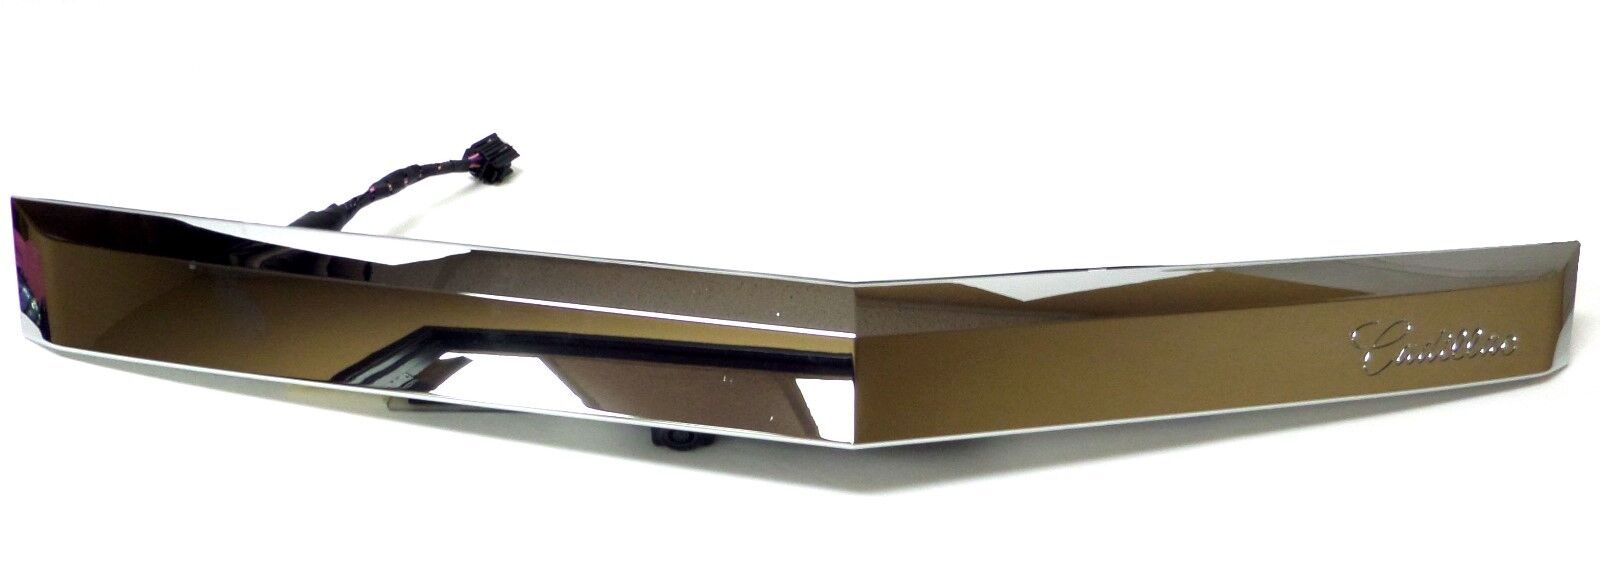 2011-2015 Cadillac CTS Coupe Flushmount Rear Spoiler / License without camera 